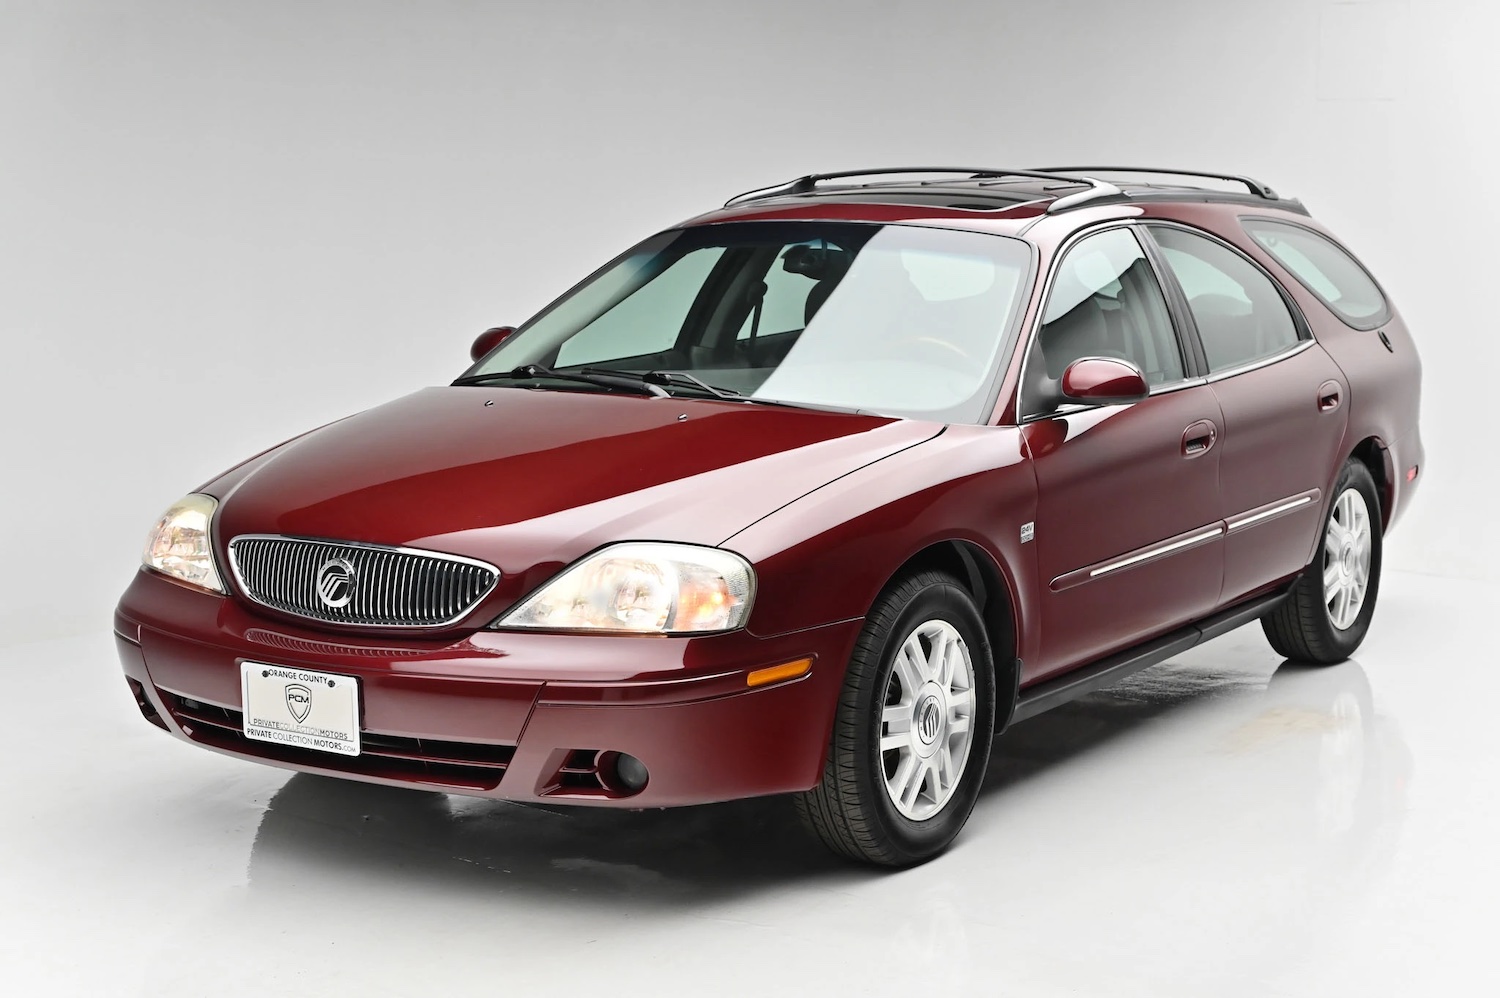 Someone Paid $15K For A 2005 Mercury Sable LS Wagon